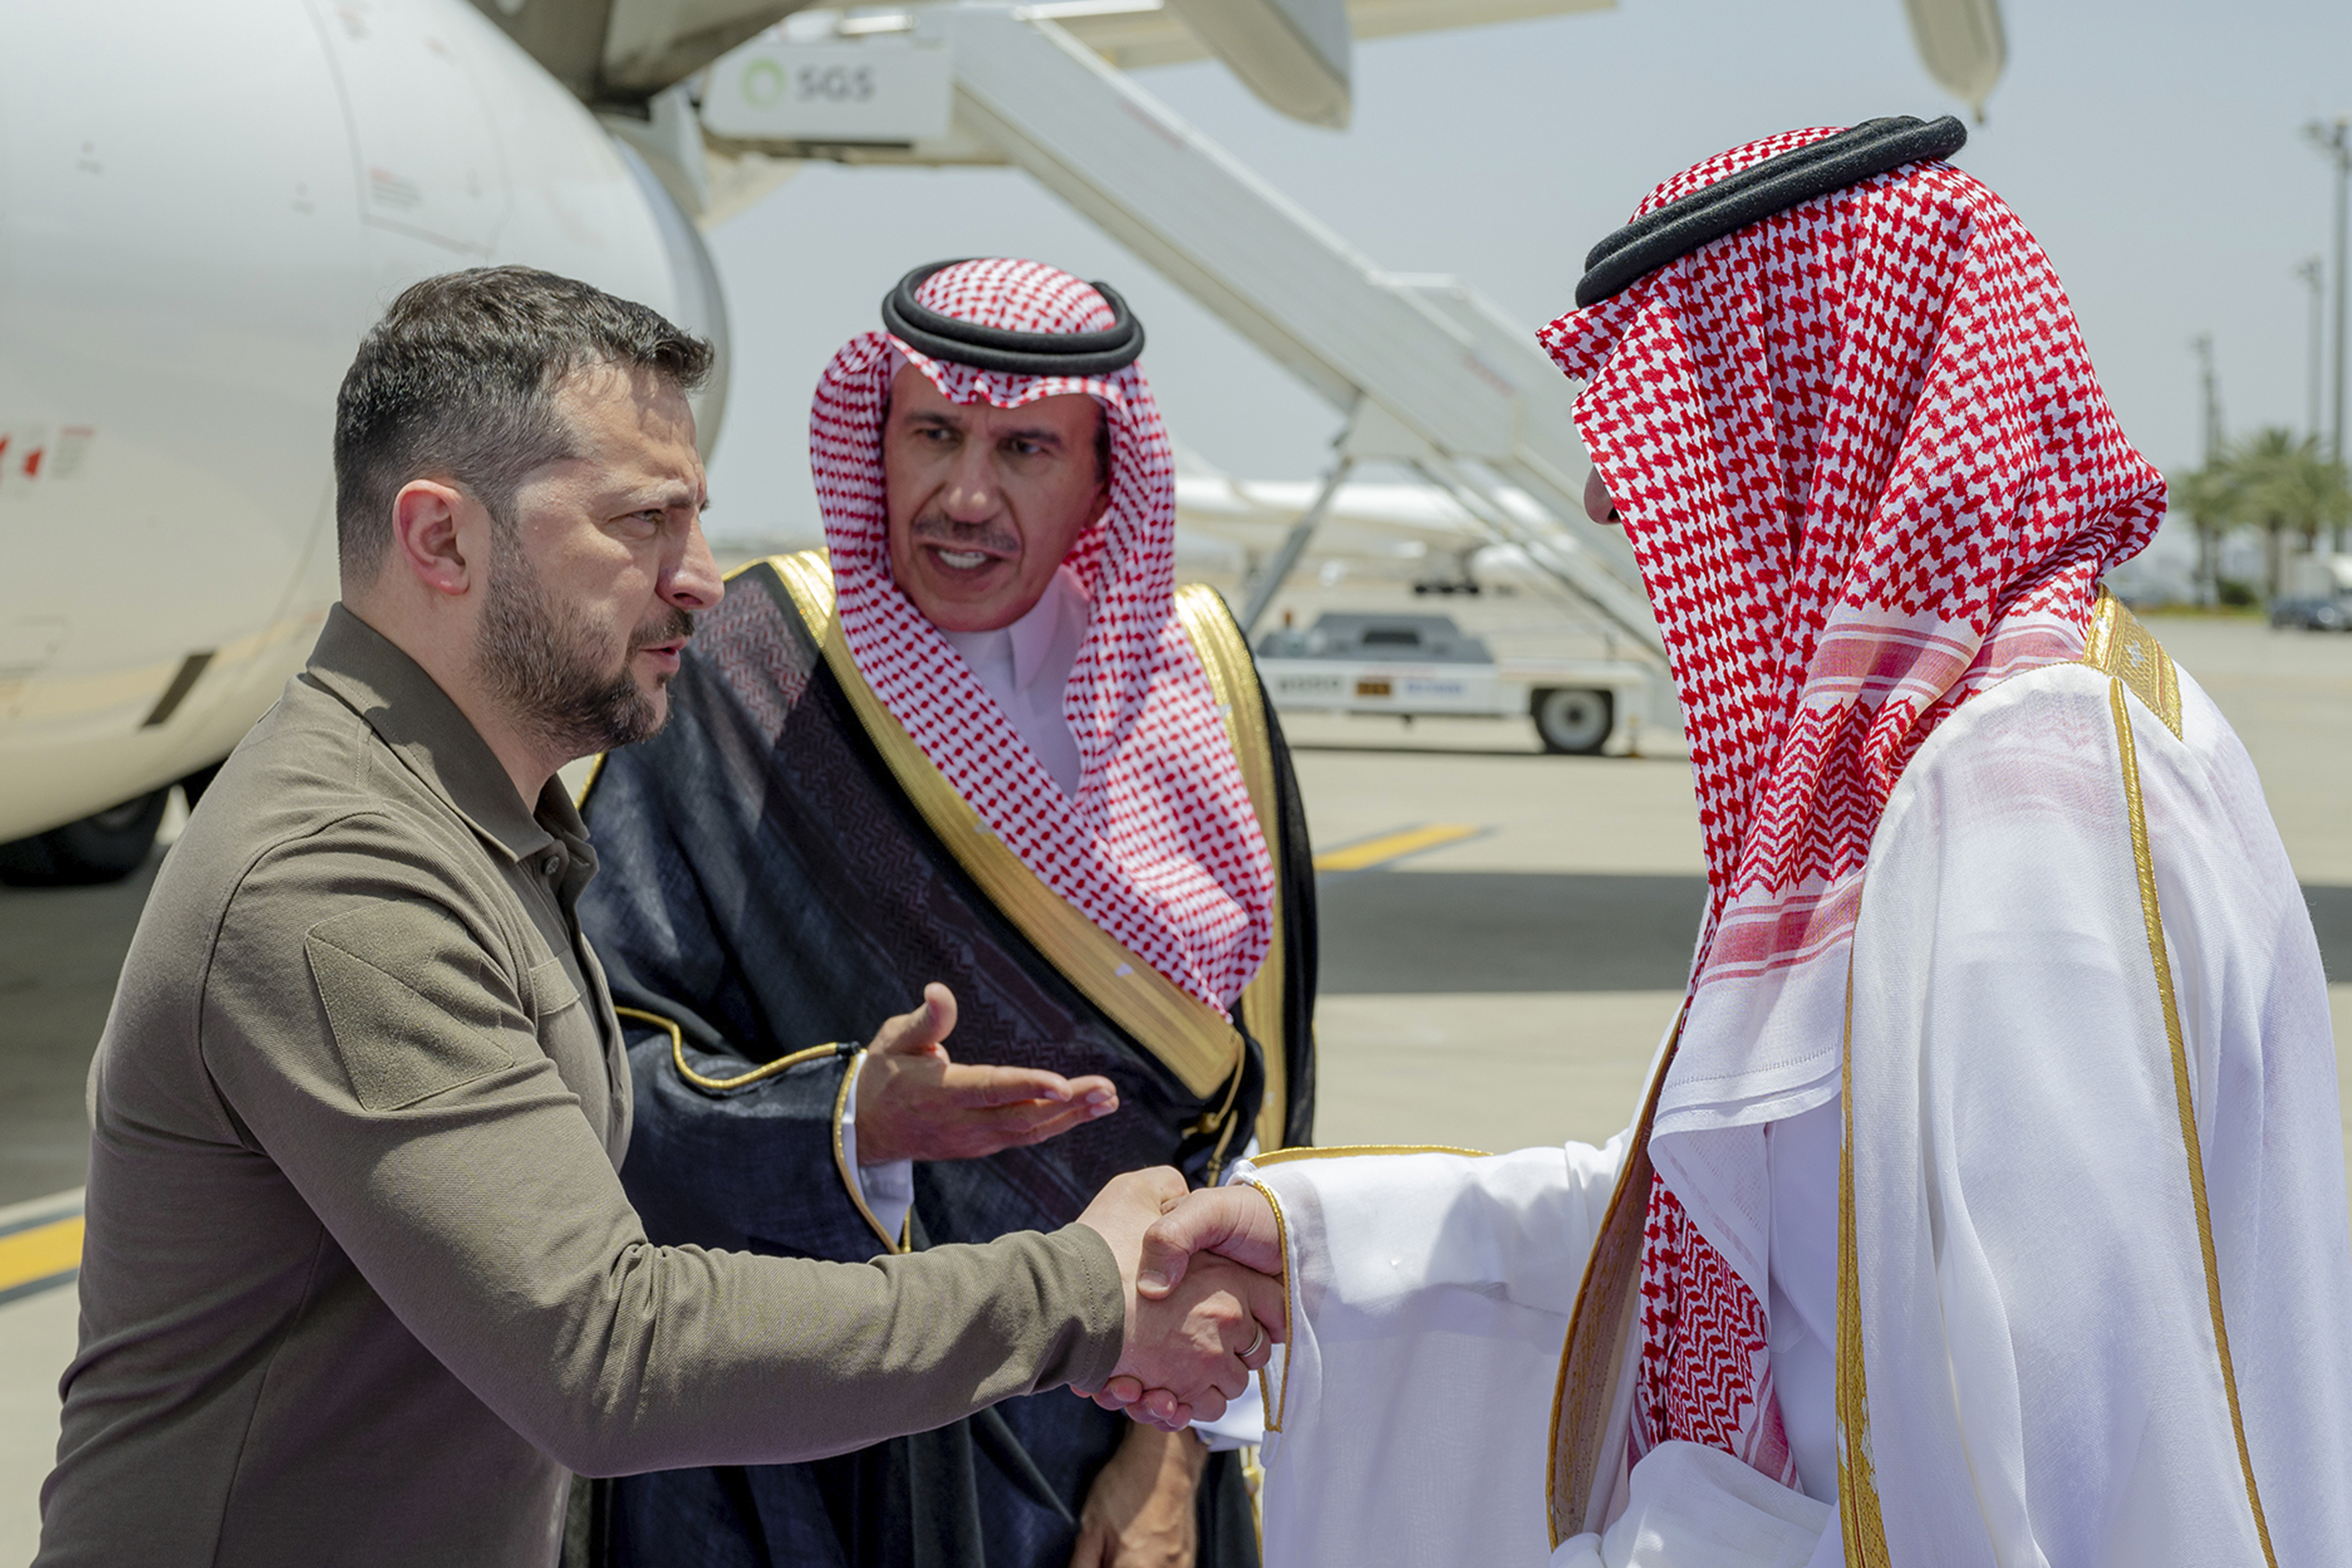 Ukraine's President Volodymyr Zelenskyy, left, is greeted by Prince Badr Bin Sultan, deputy governor of Mecca, upon his arrival at Jeddah airport, Saudi Arabia, Friday, May 19, 2023, to attend the Arab summit